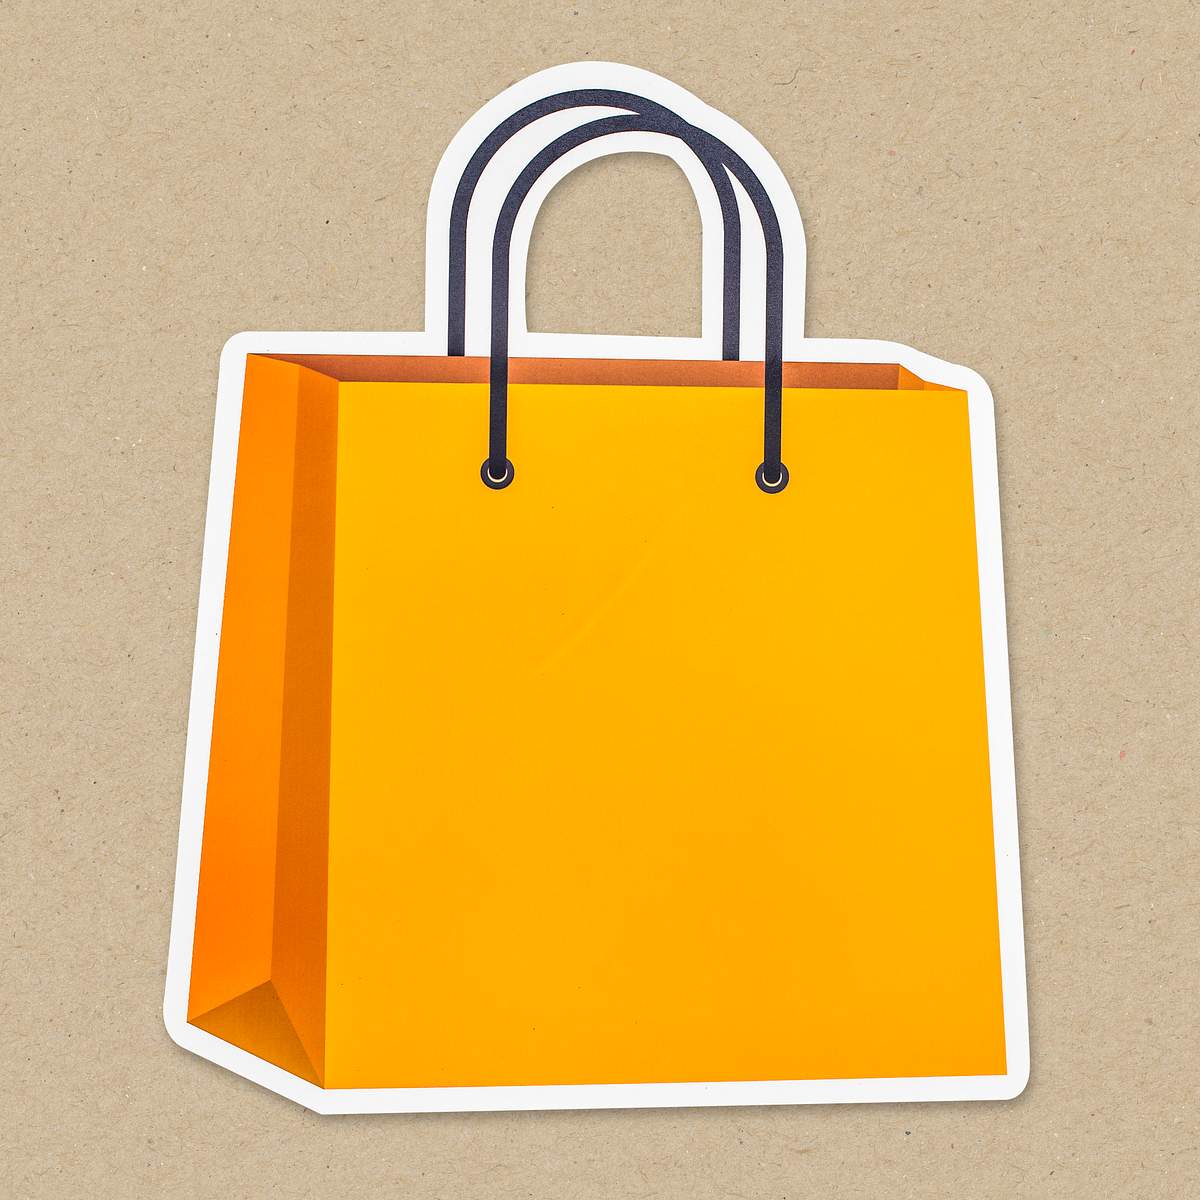 Download Yellow Shopping Bag Icon Isolated Free Photo 476604 PSD Mockup Templates